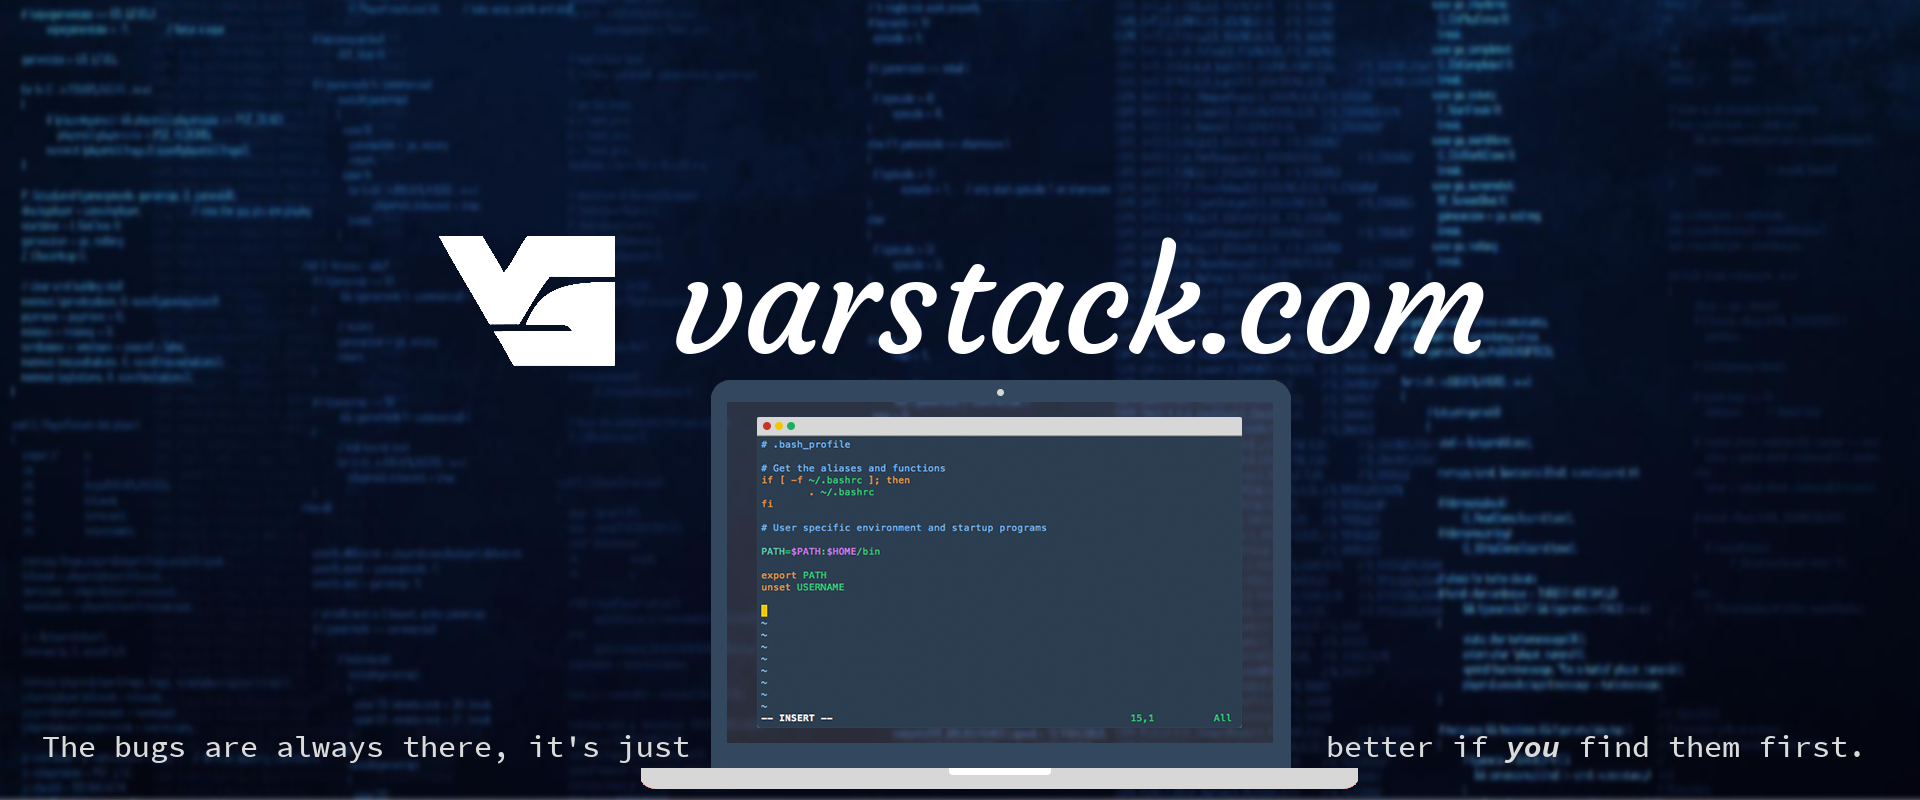 Varstack Logo - Bugs are always there